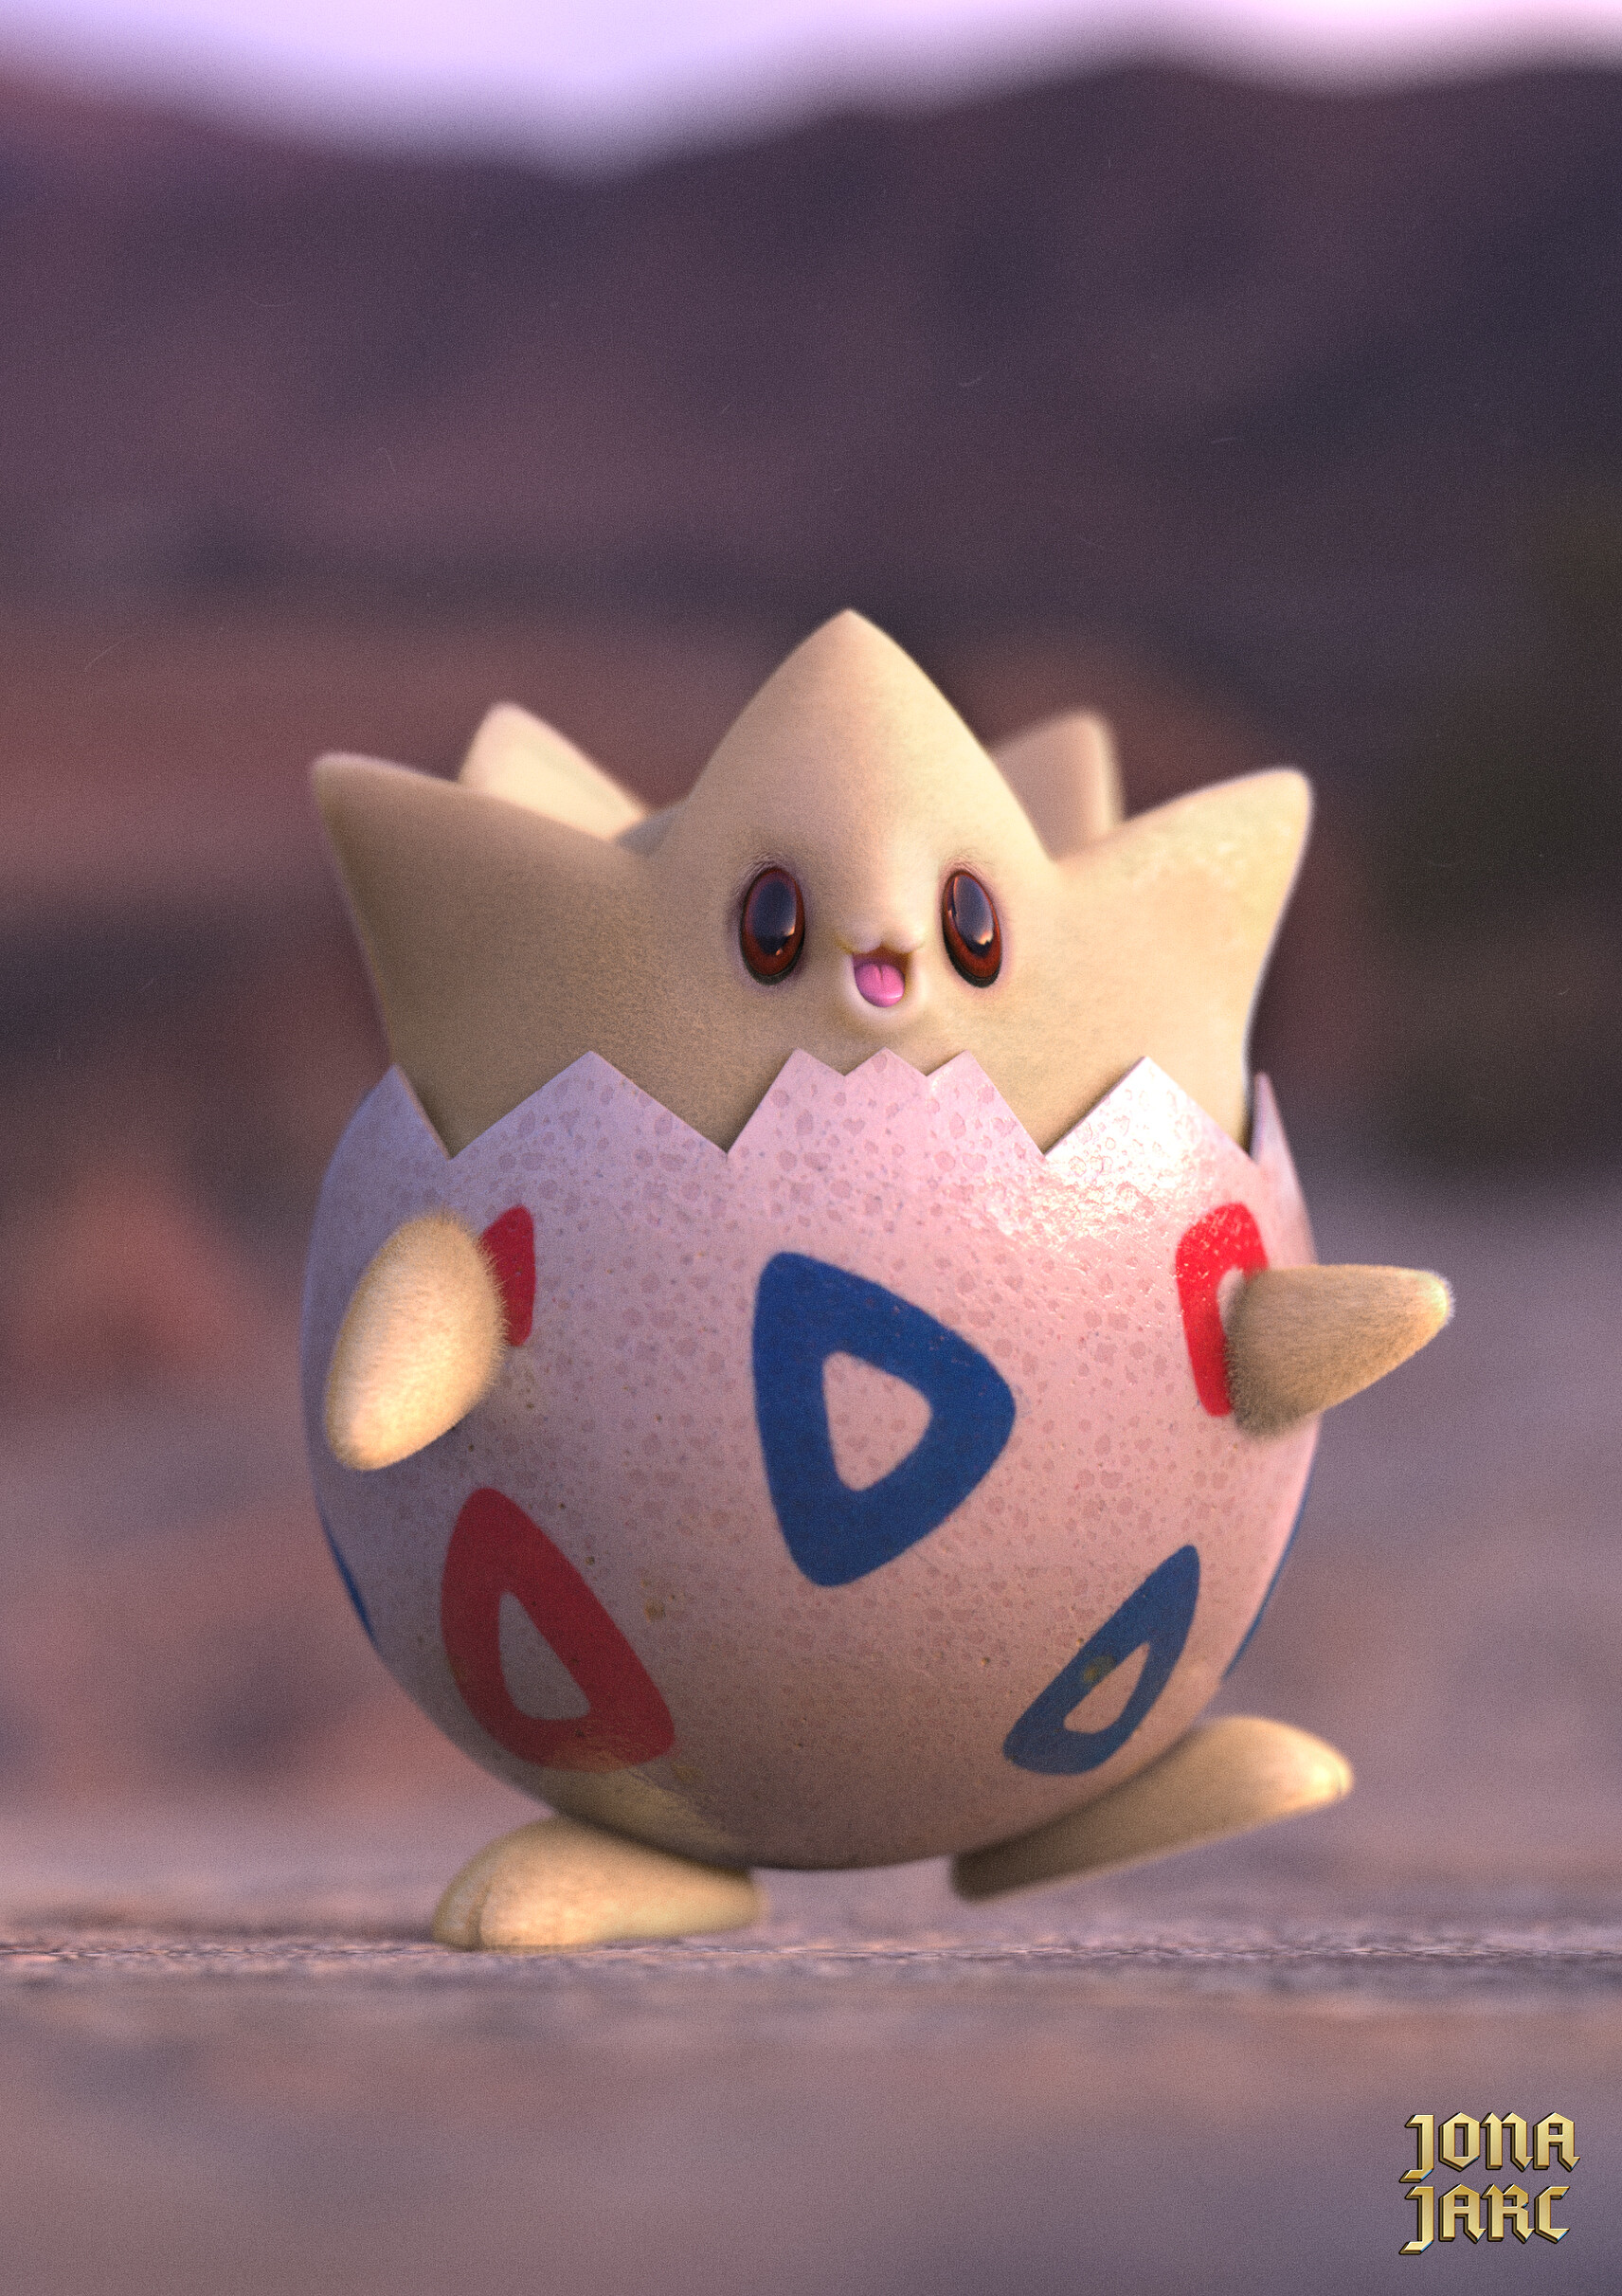 Of togepi pictures Steamy Pictures